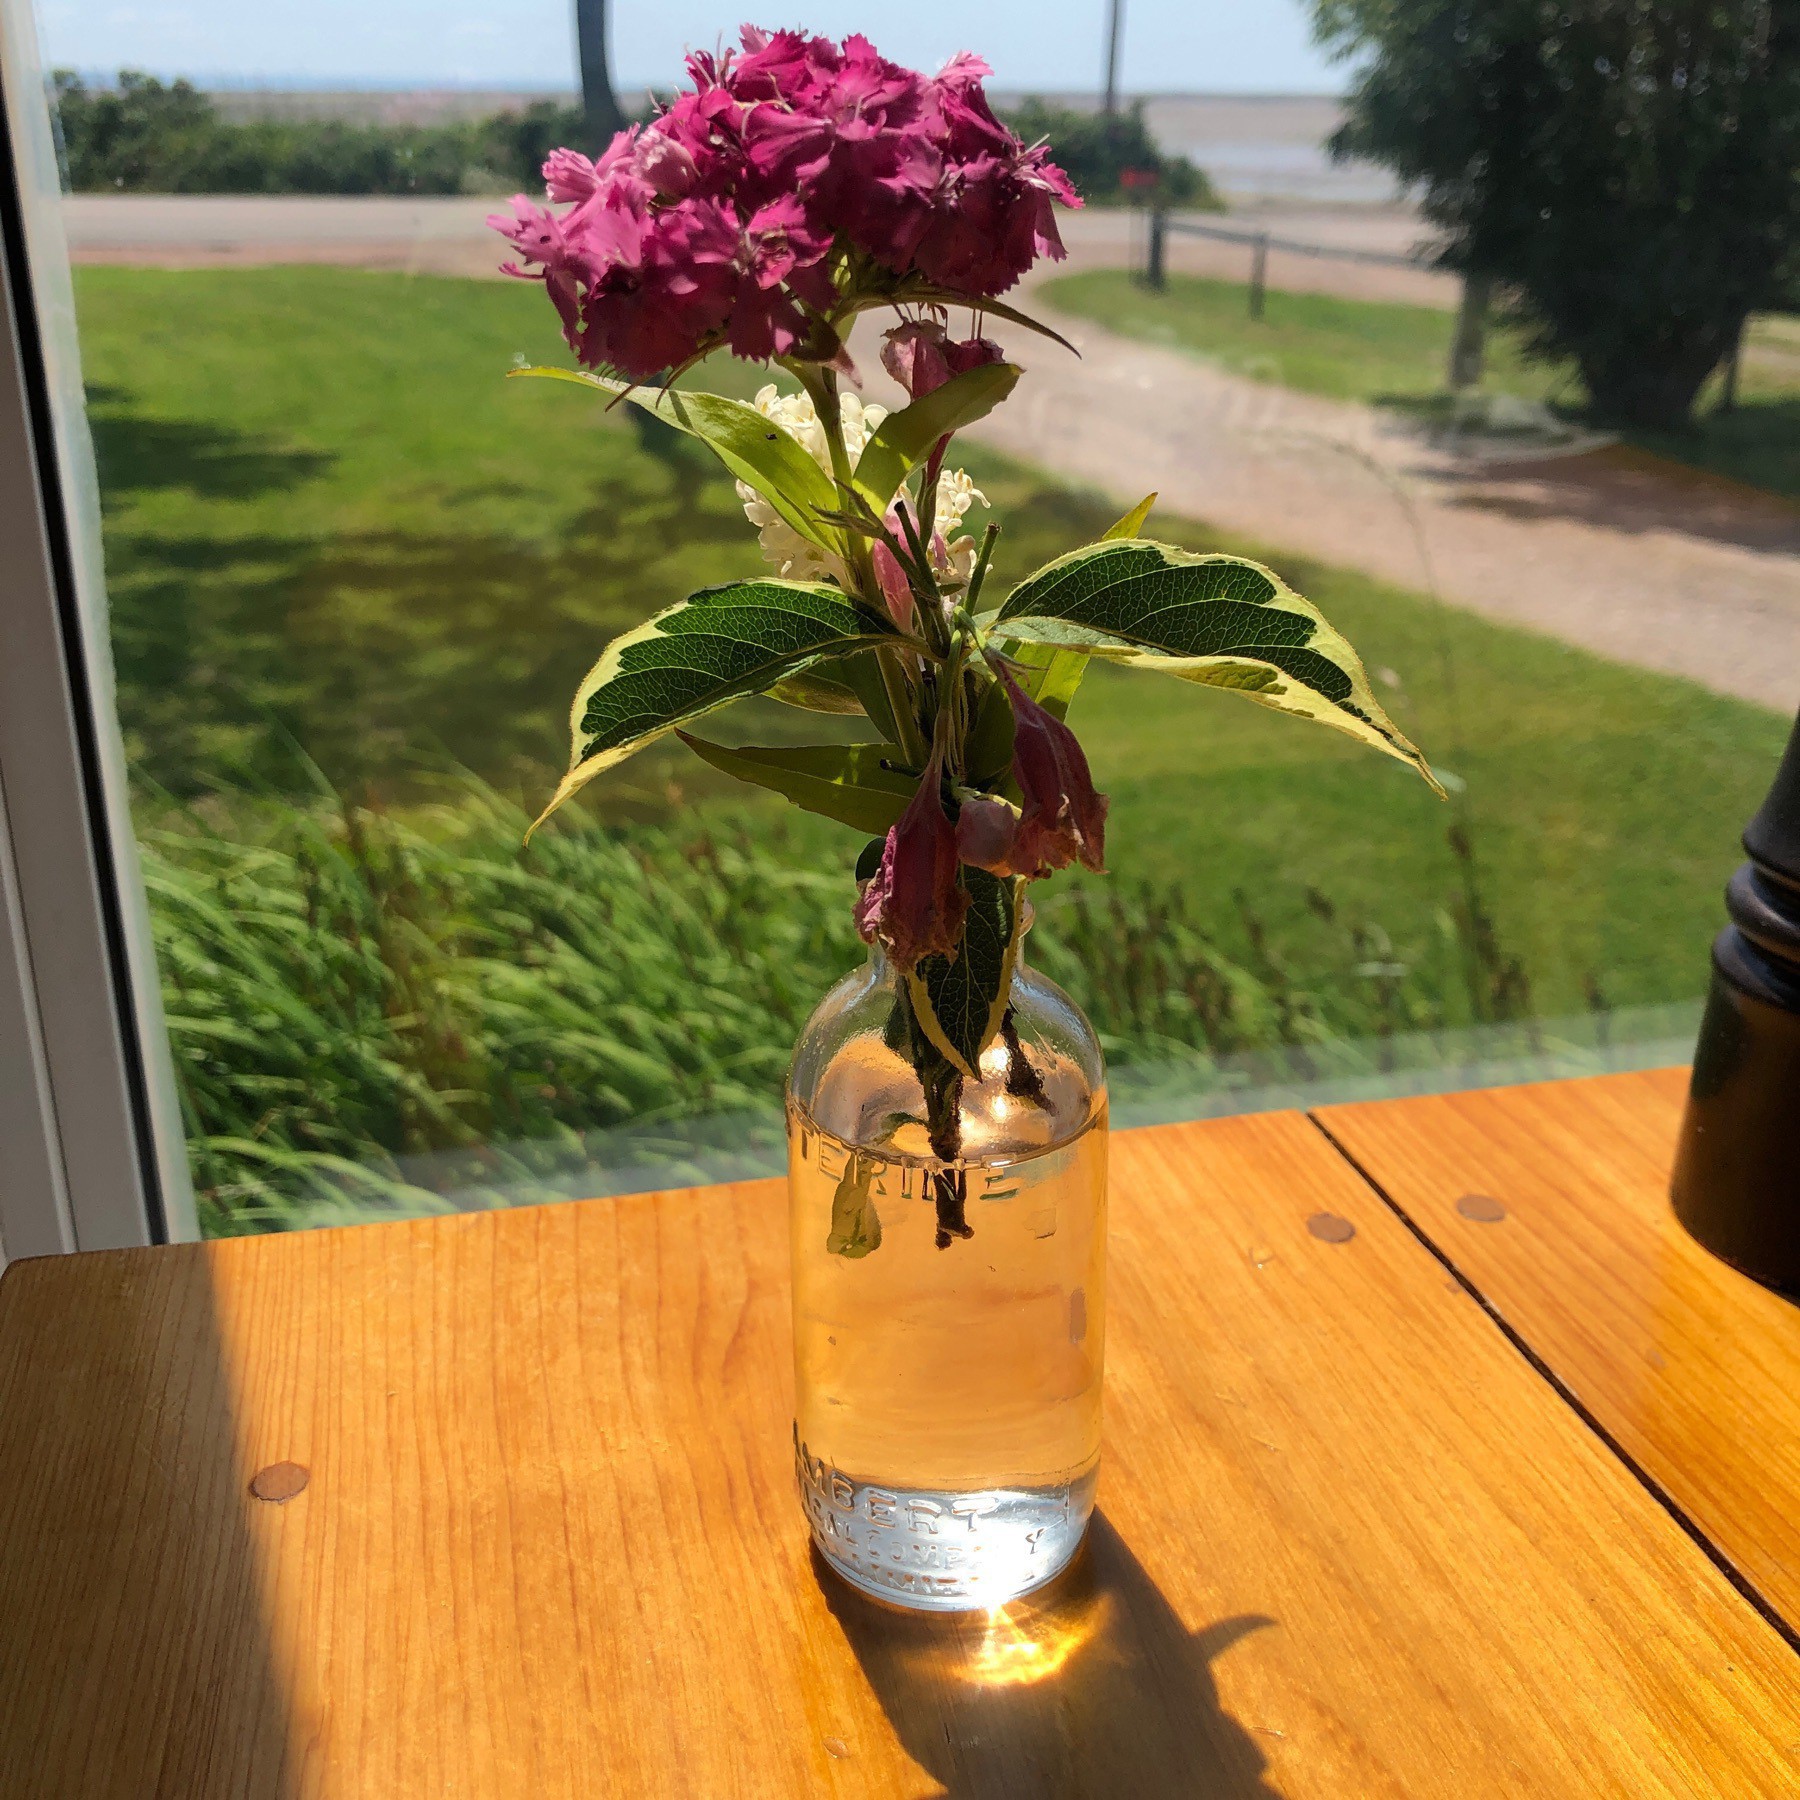 Flower in vase on table in front of window.